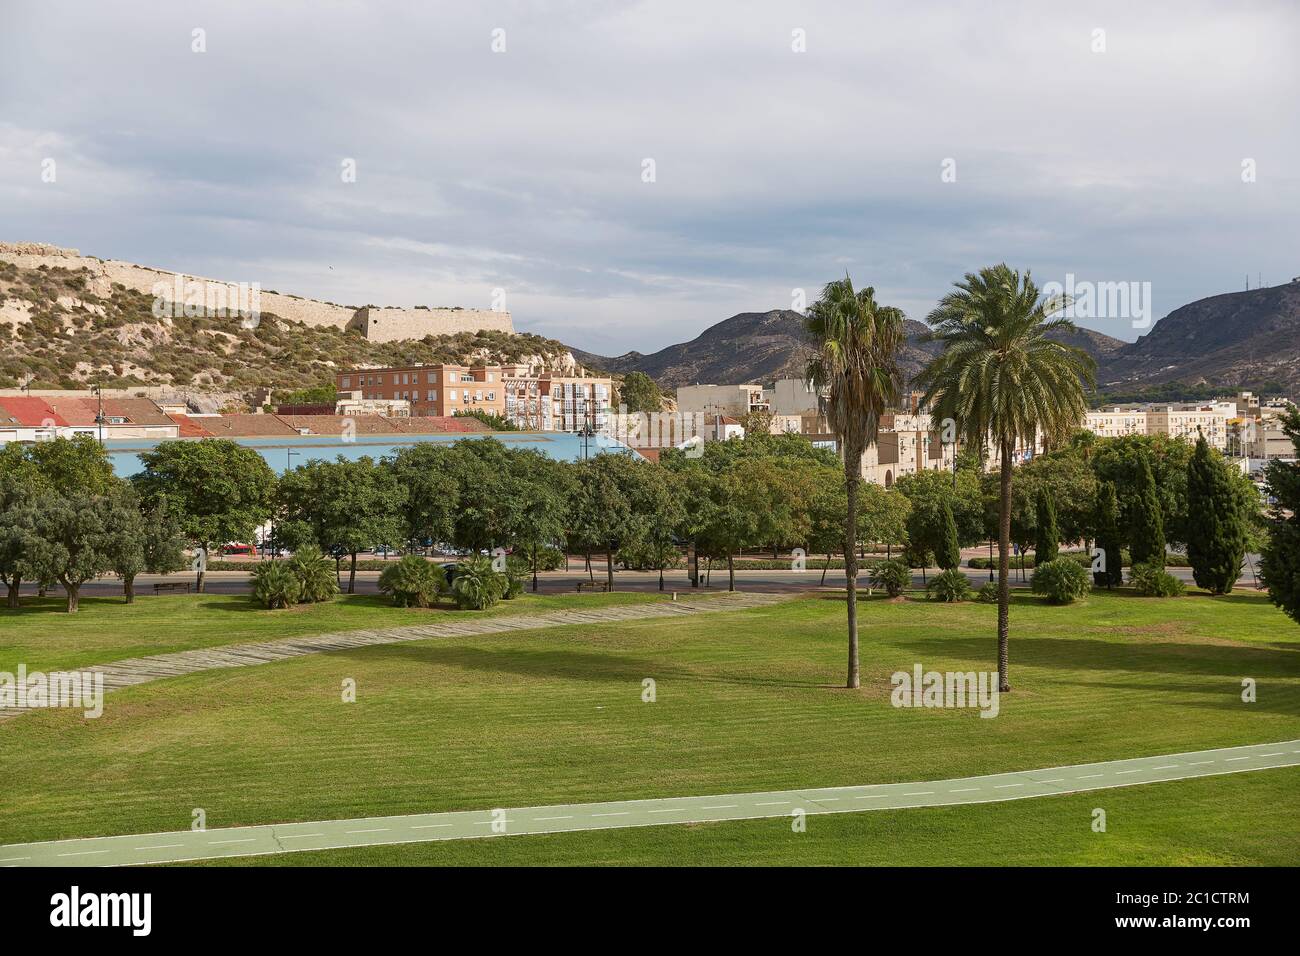 Park and green area in city of Cartagena in region Murcia in Spain Stock Photo